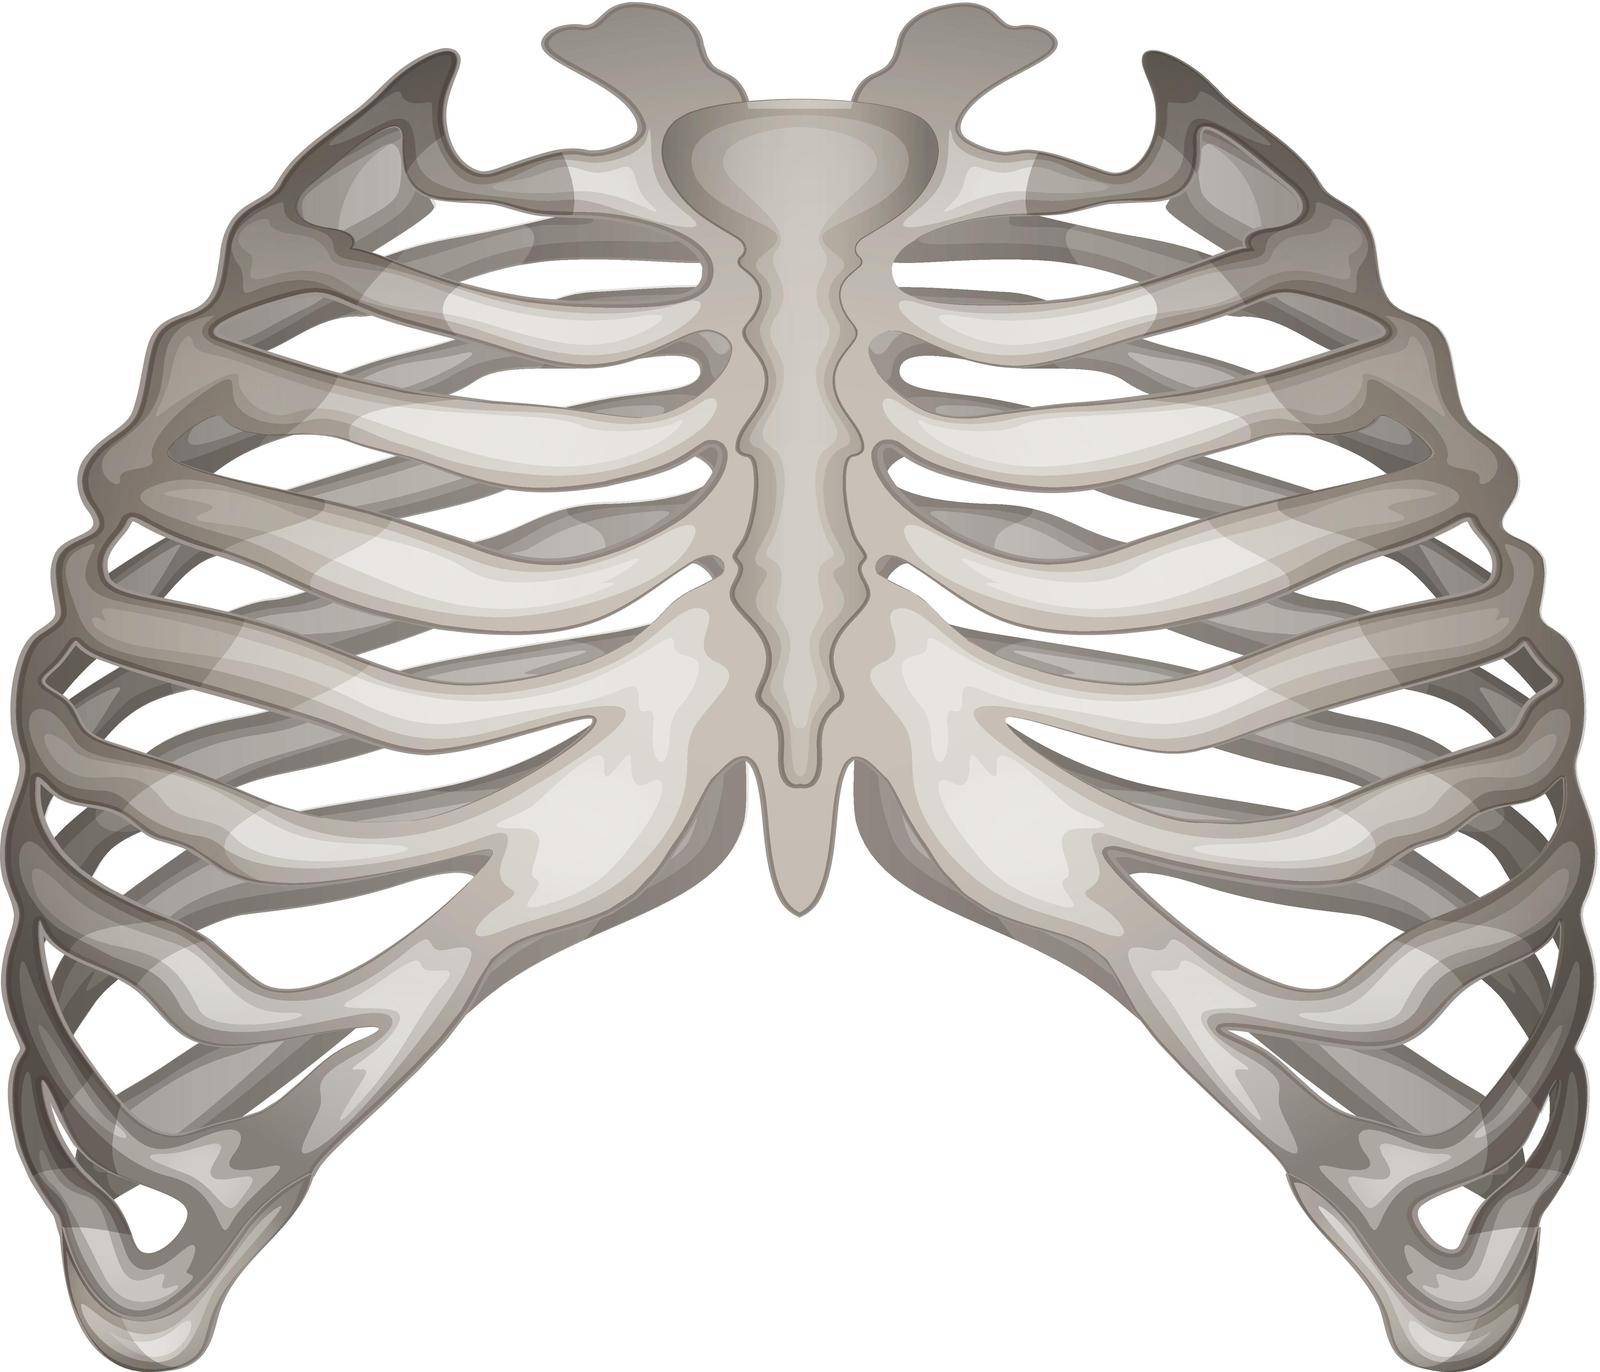 Illustration of the rib cage on a white background